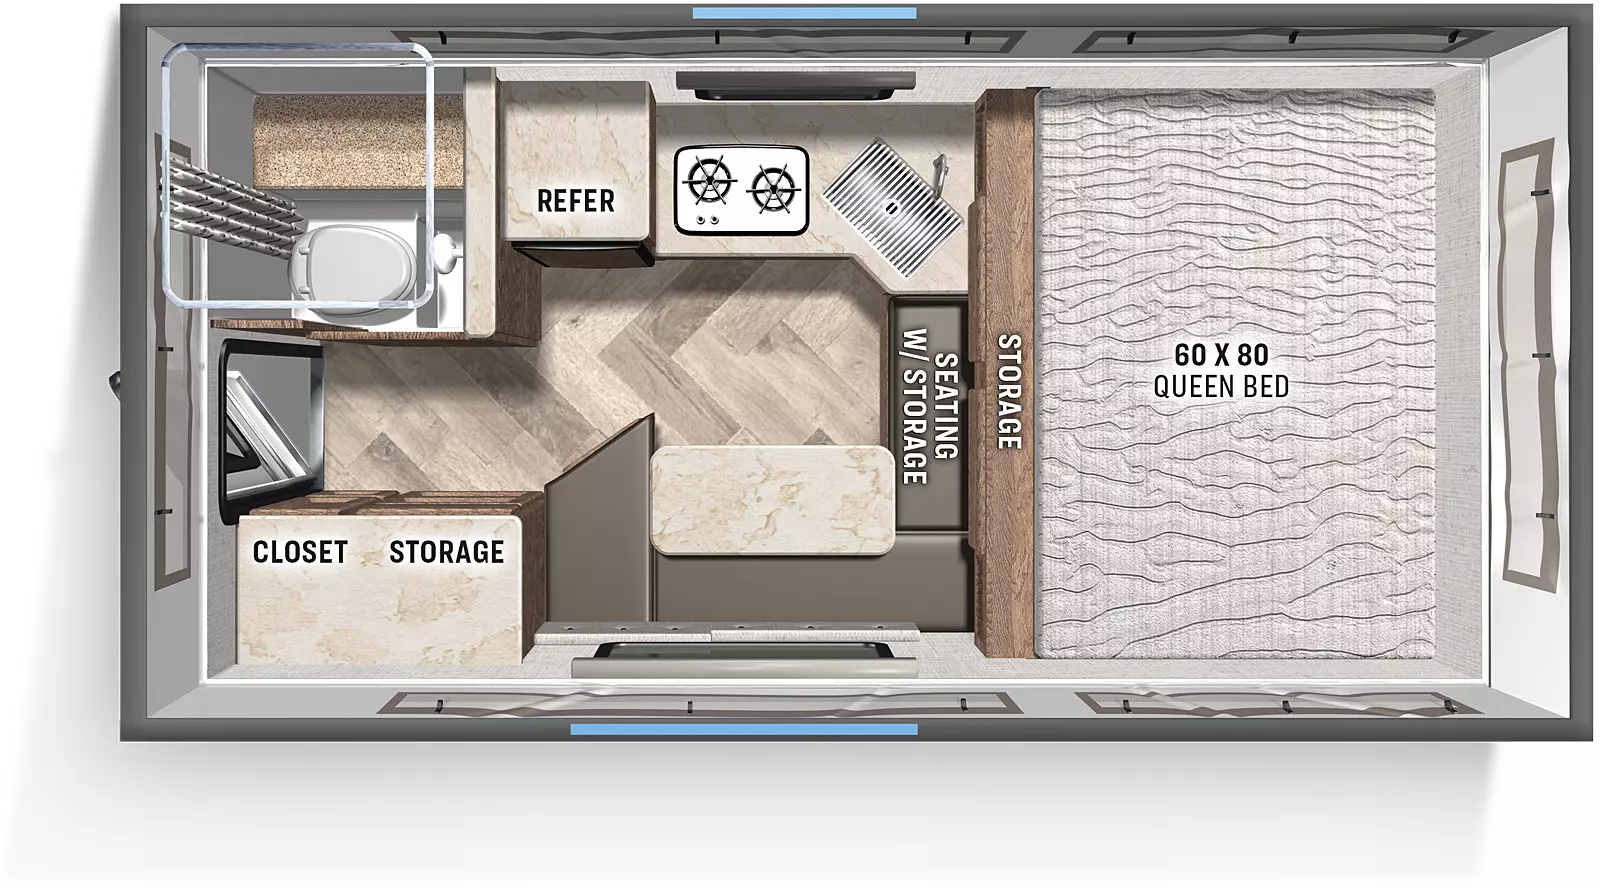 The Backpack SS-1500 includes a rear entry door, toilet and shower, a refrigerator, a cooktop and sink, a step up to the bedroom; bedroom includes a 60 x 80 queen bed; the kitchen includes a dinette booth with table and storage underneath seating, a closet with storage and LP tank. 